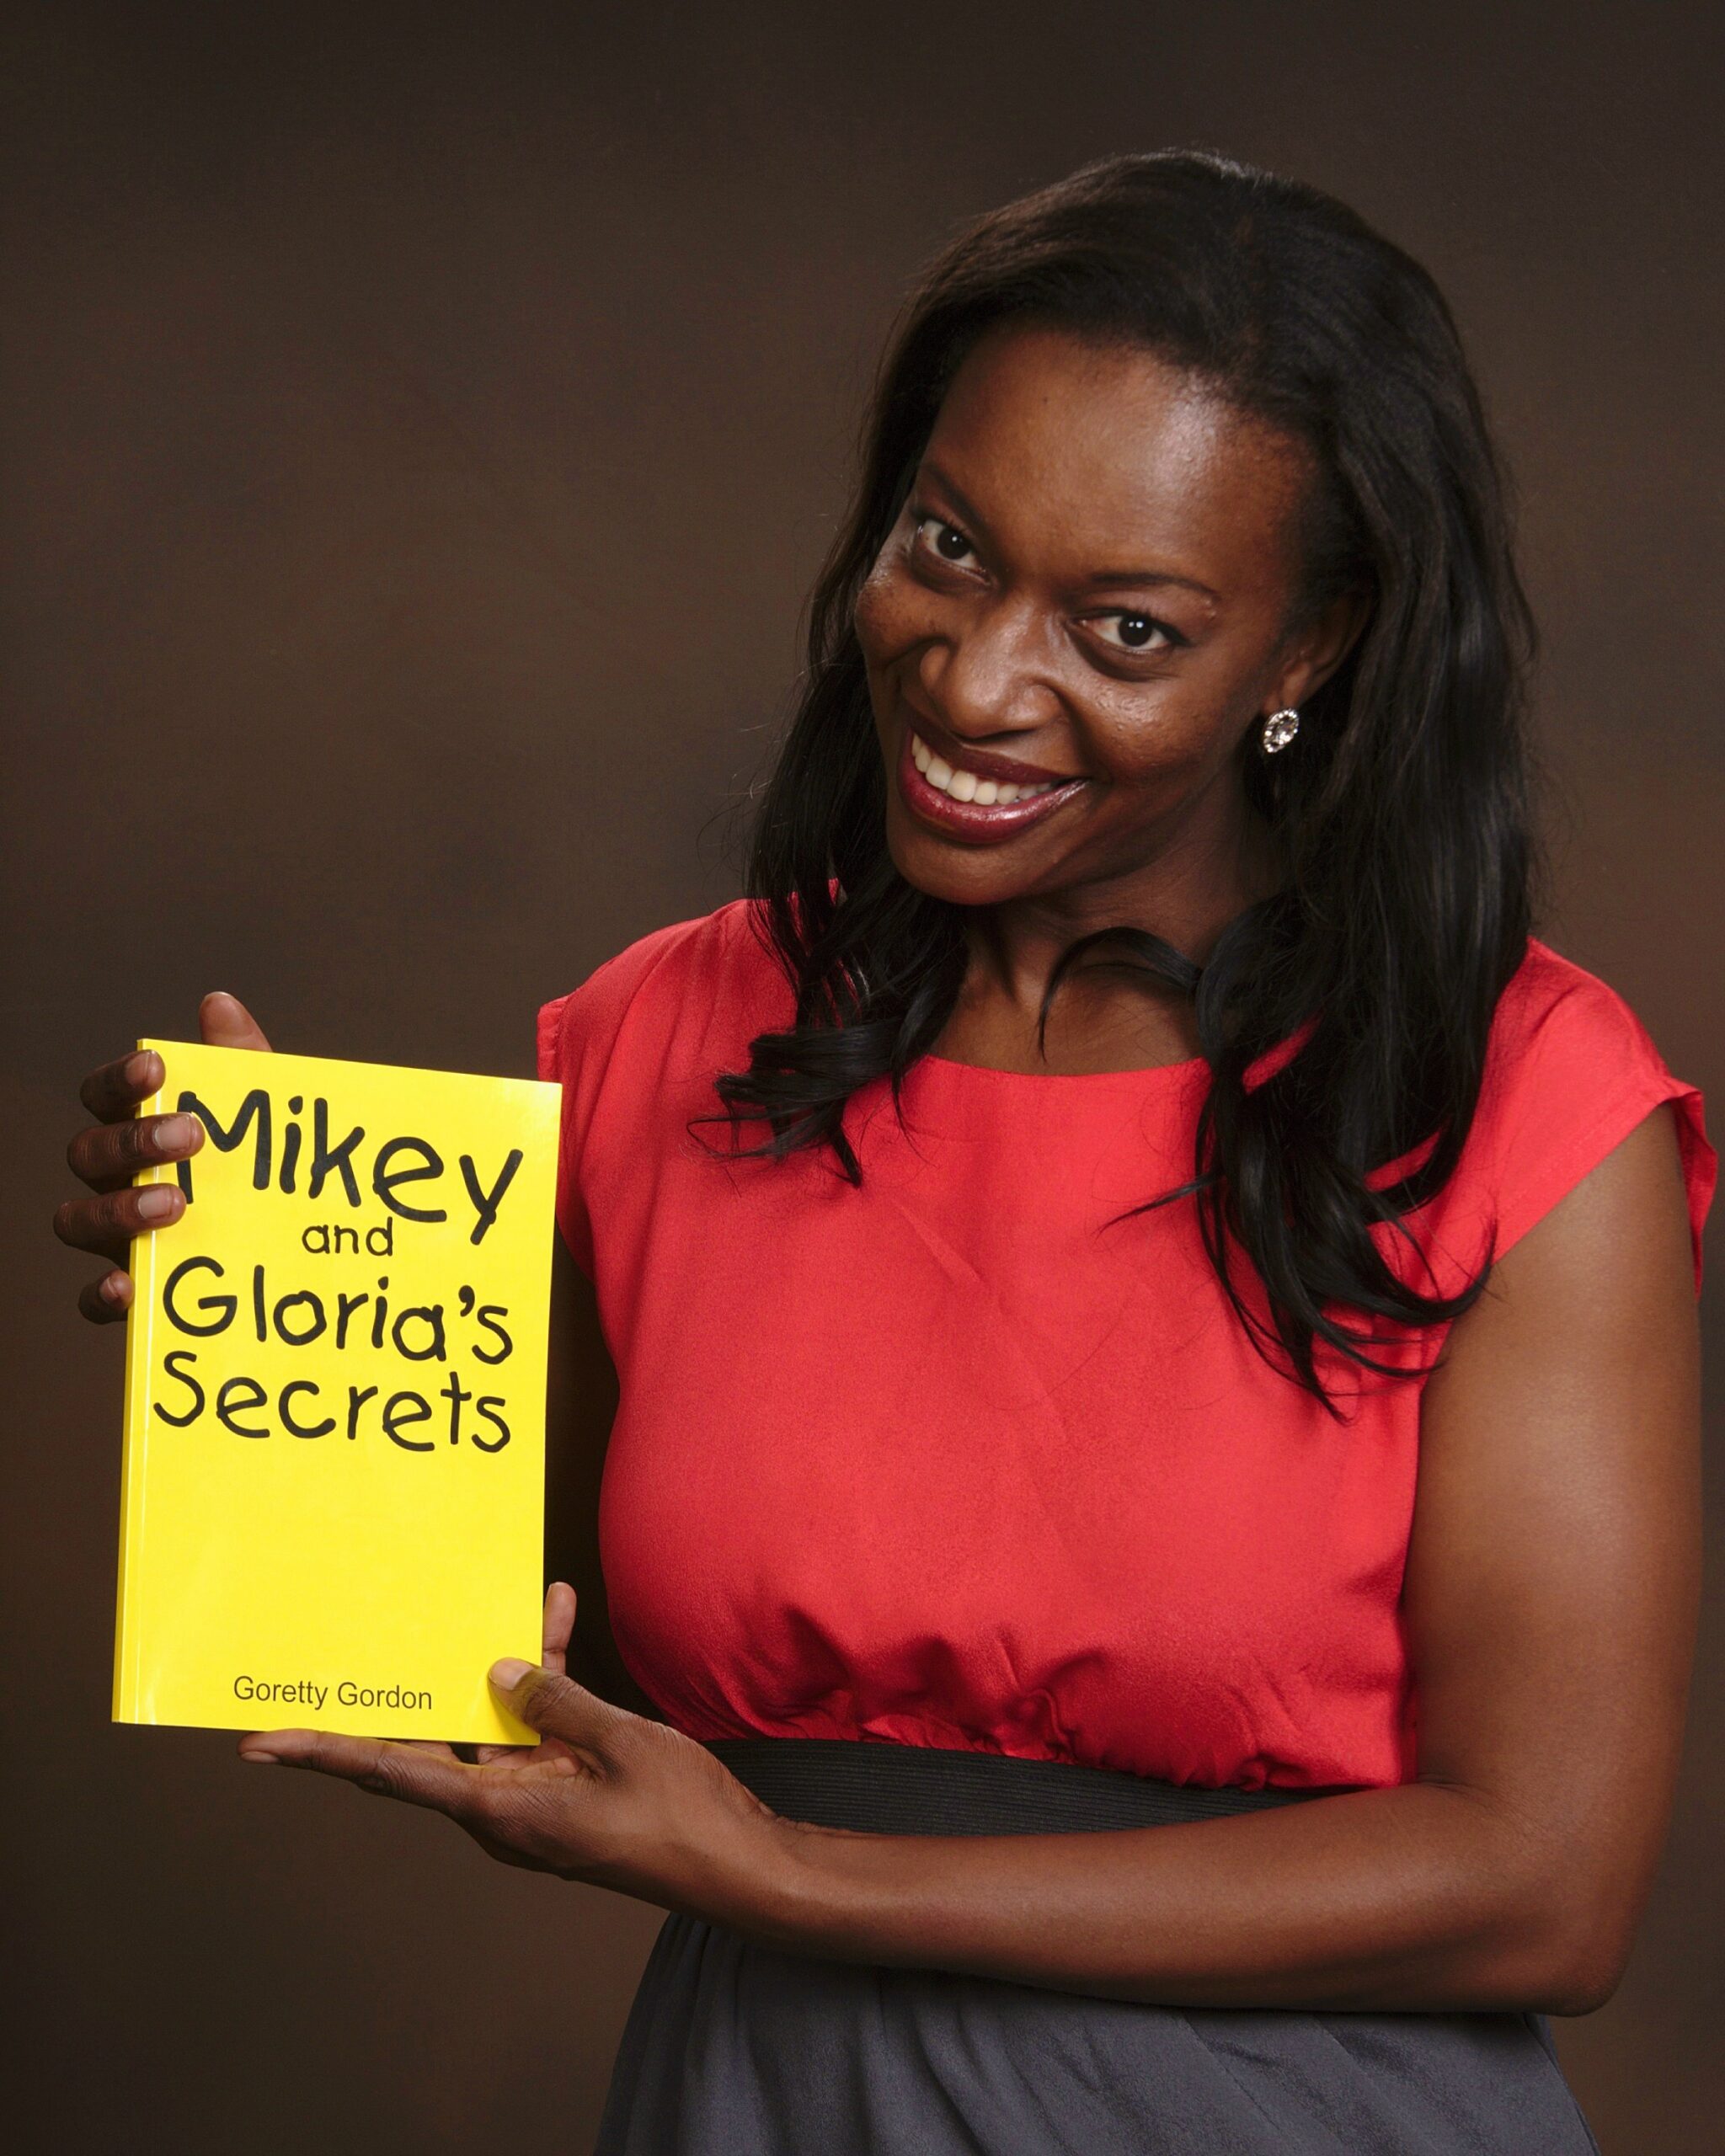 Kreyolicious in Memoriam|Interview: Goretty Gordon, Author of Mikey and Gloria's Secrets Talks About Her Self-Publishing Journey